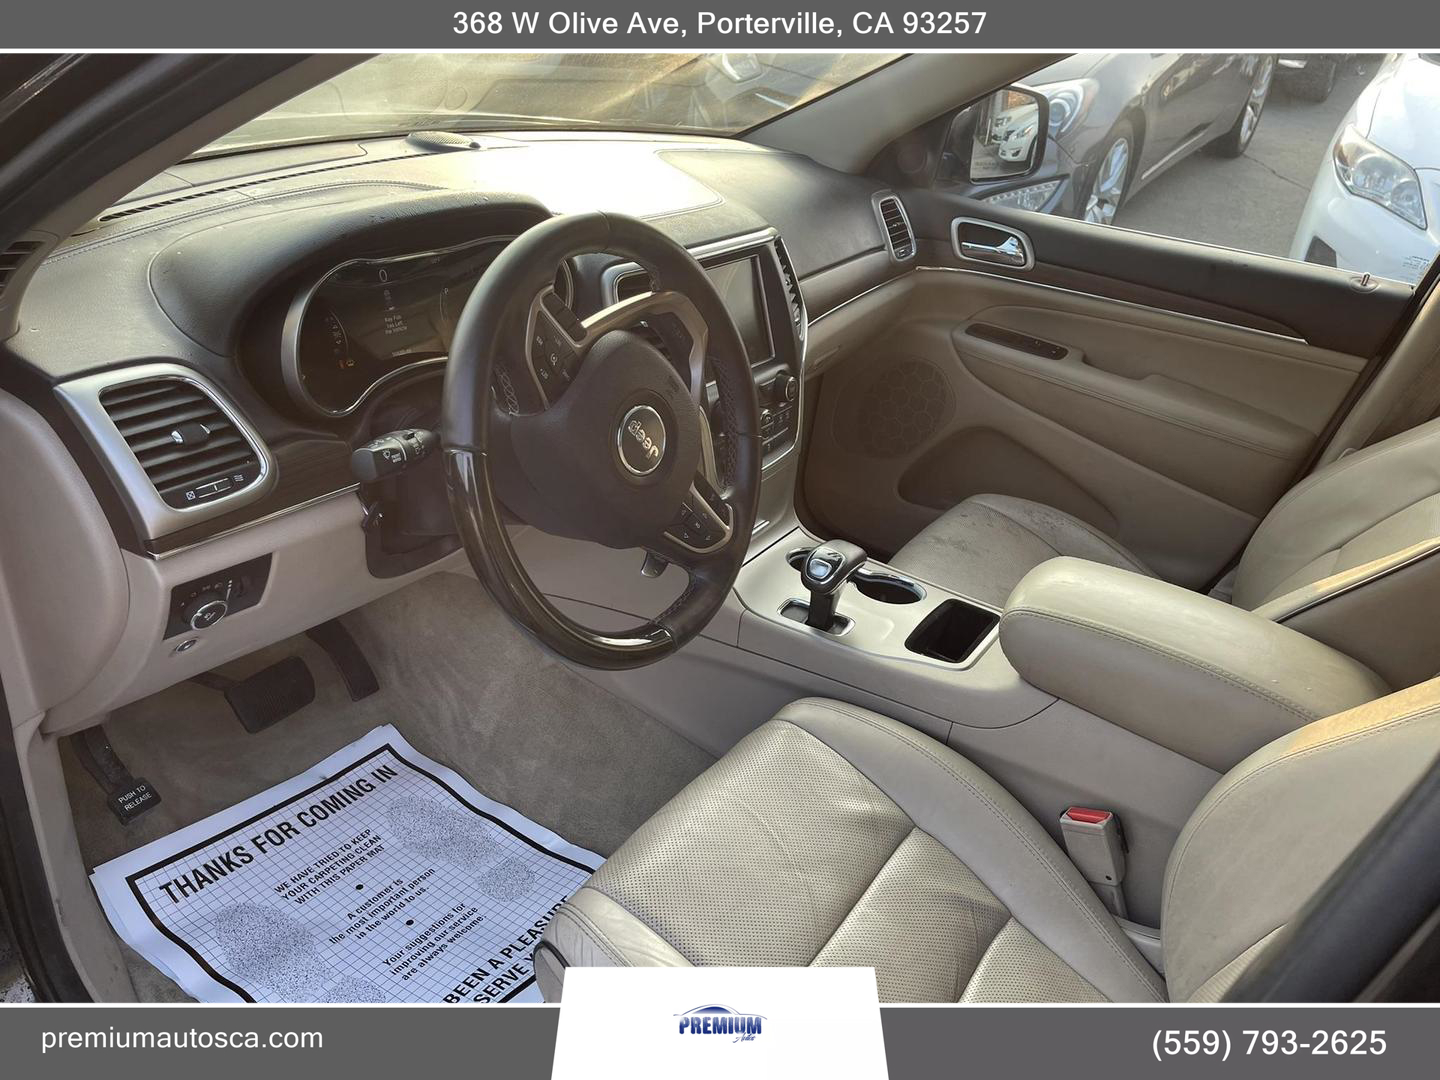 USED JEEP GRAND CHEROKEE 2014 for sale in Porterville, CA